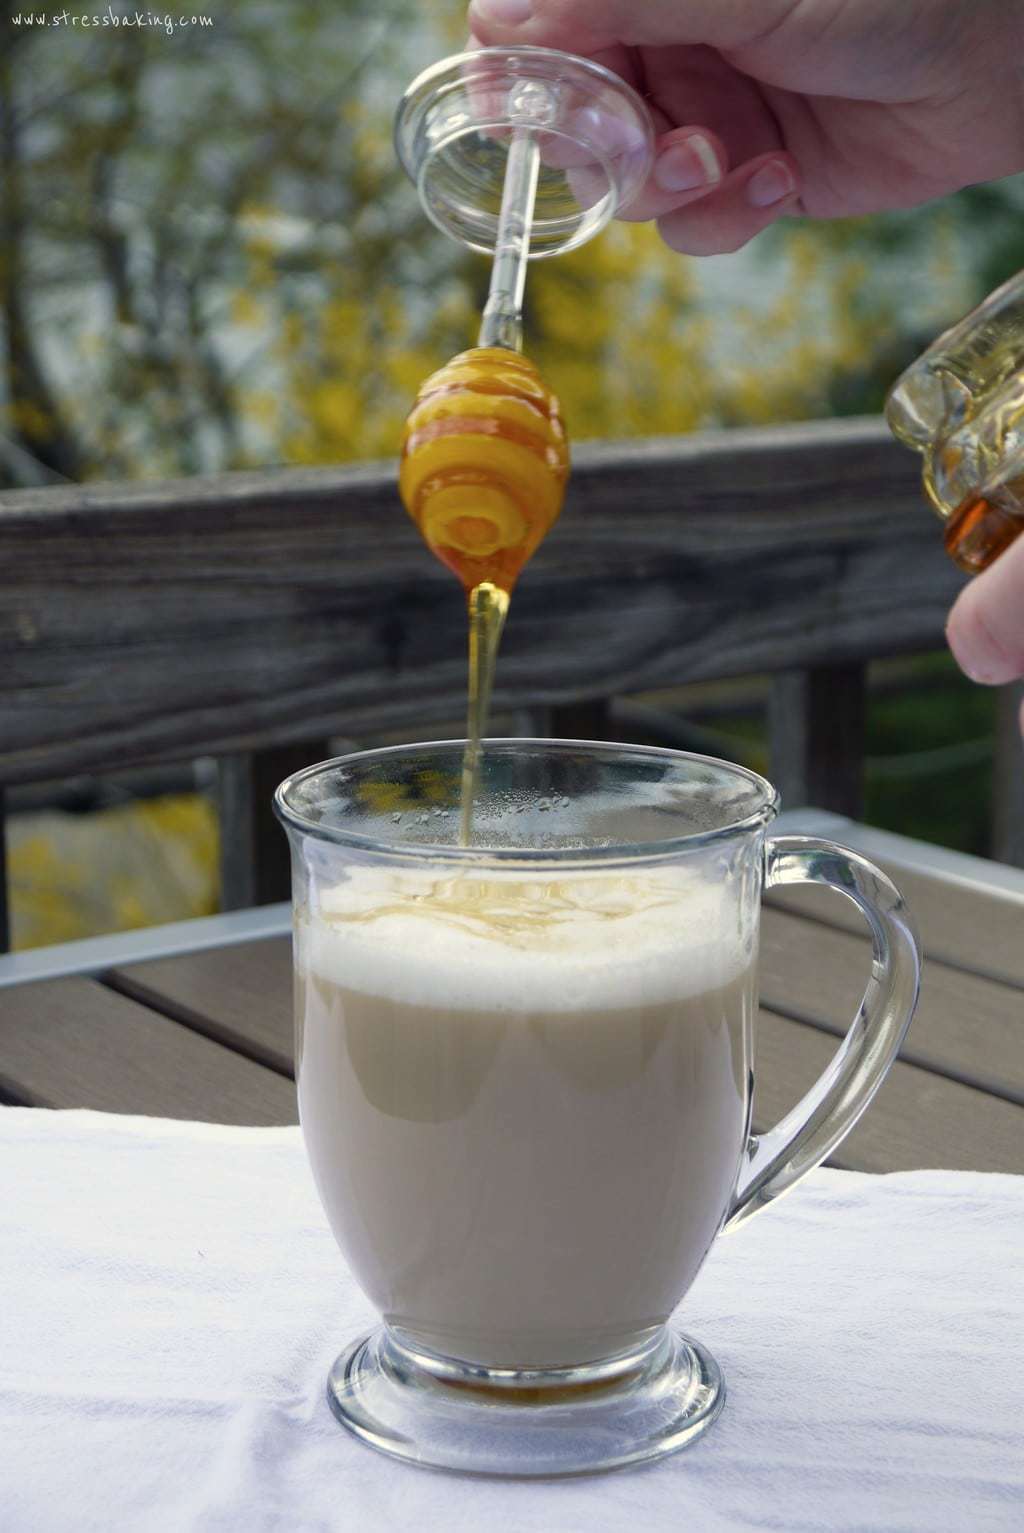 Honey being drizzle onto a latte in a clear mug